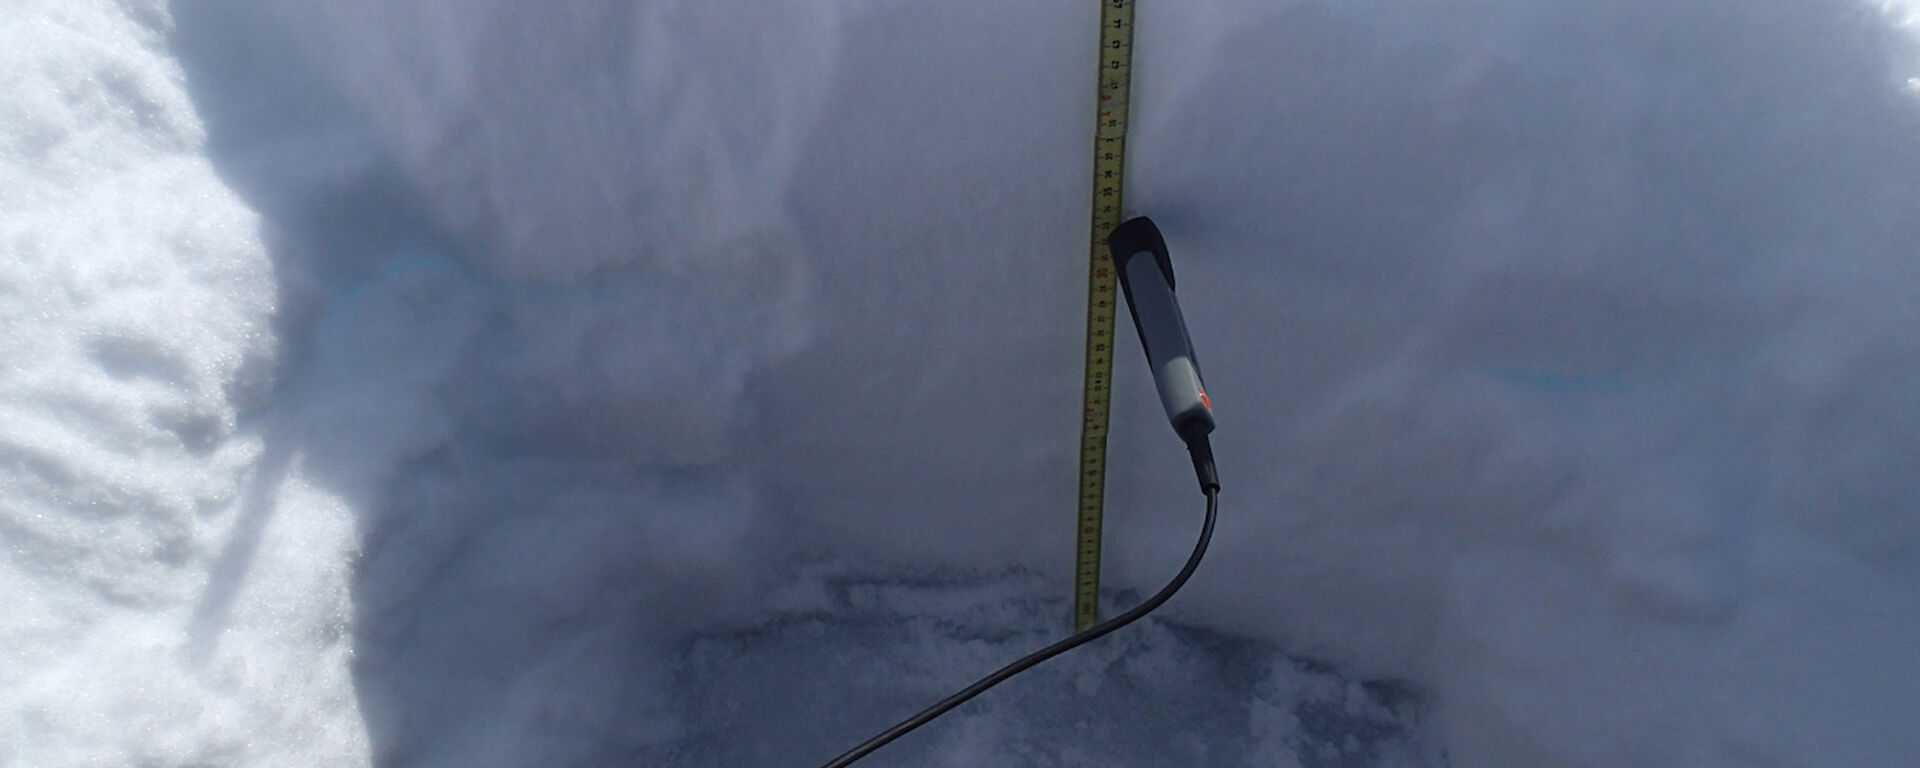 A snow pit from Transect 1 on 20 November. Here, the snow is 49cm deep; the sea ice surface is visible at the bottom. A probe measures the snow temperature, and a metal cutter of known volume used to acquire snow density samples up the snow column.